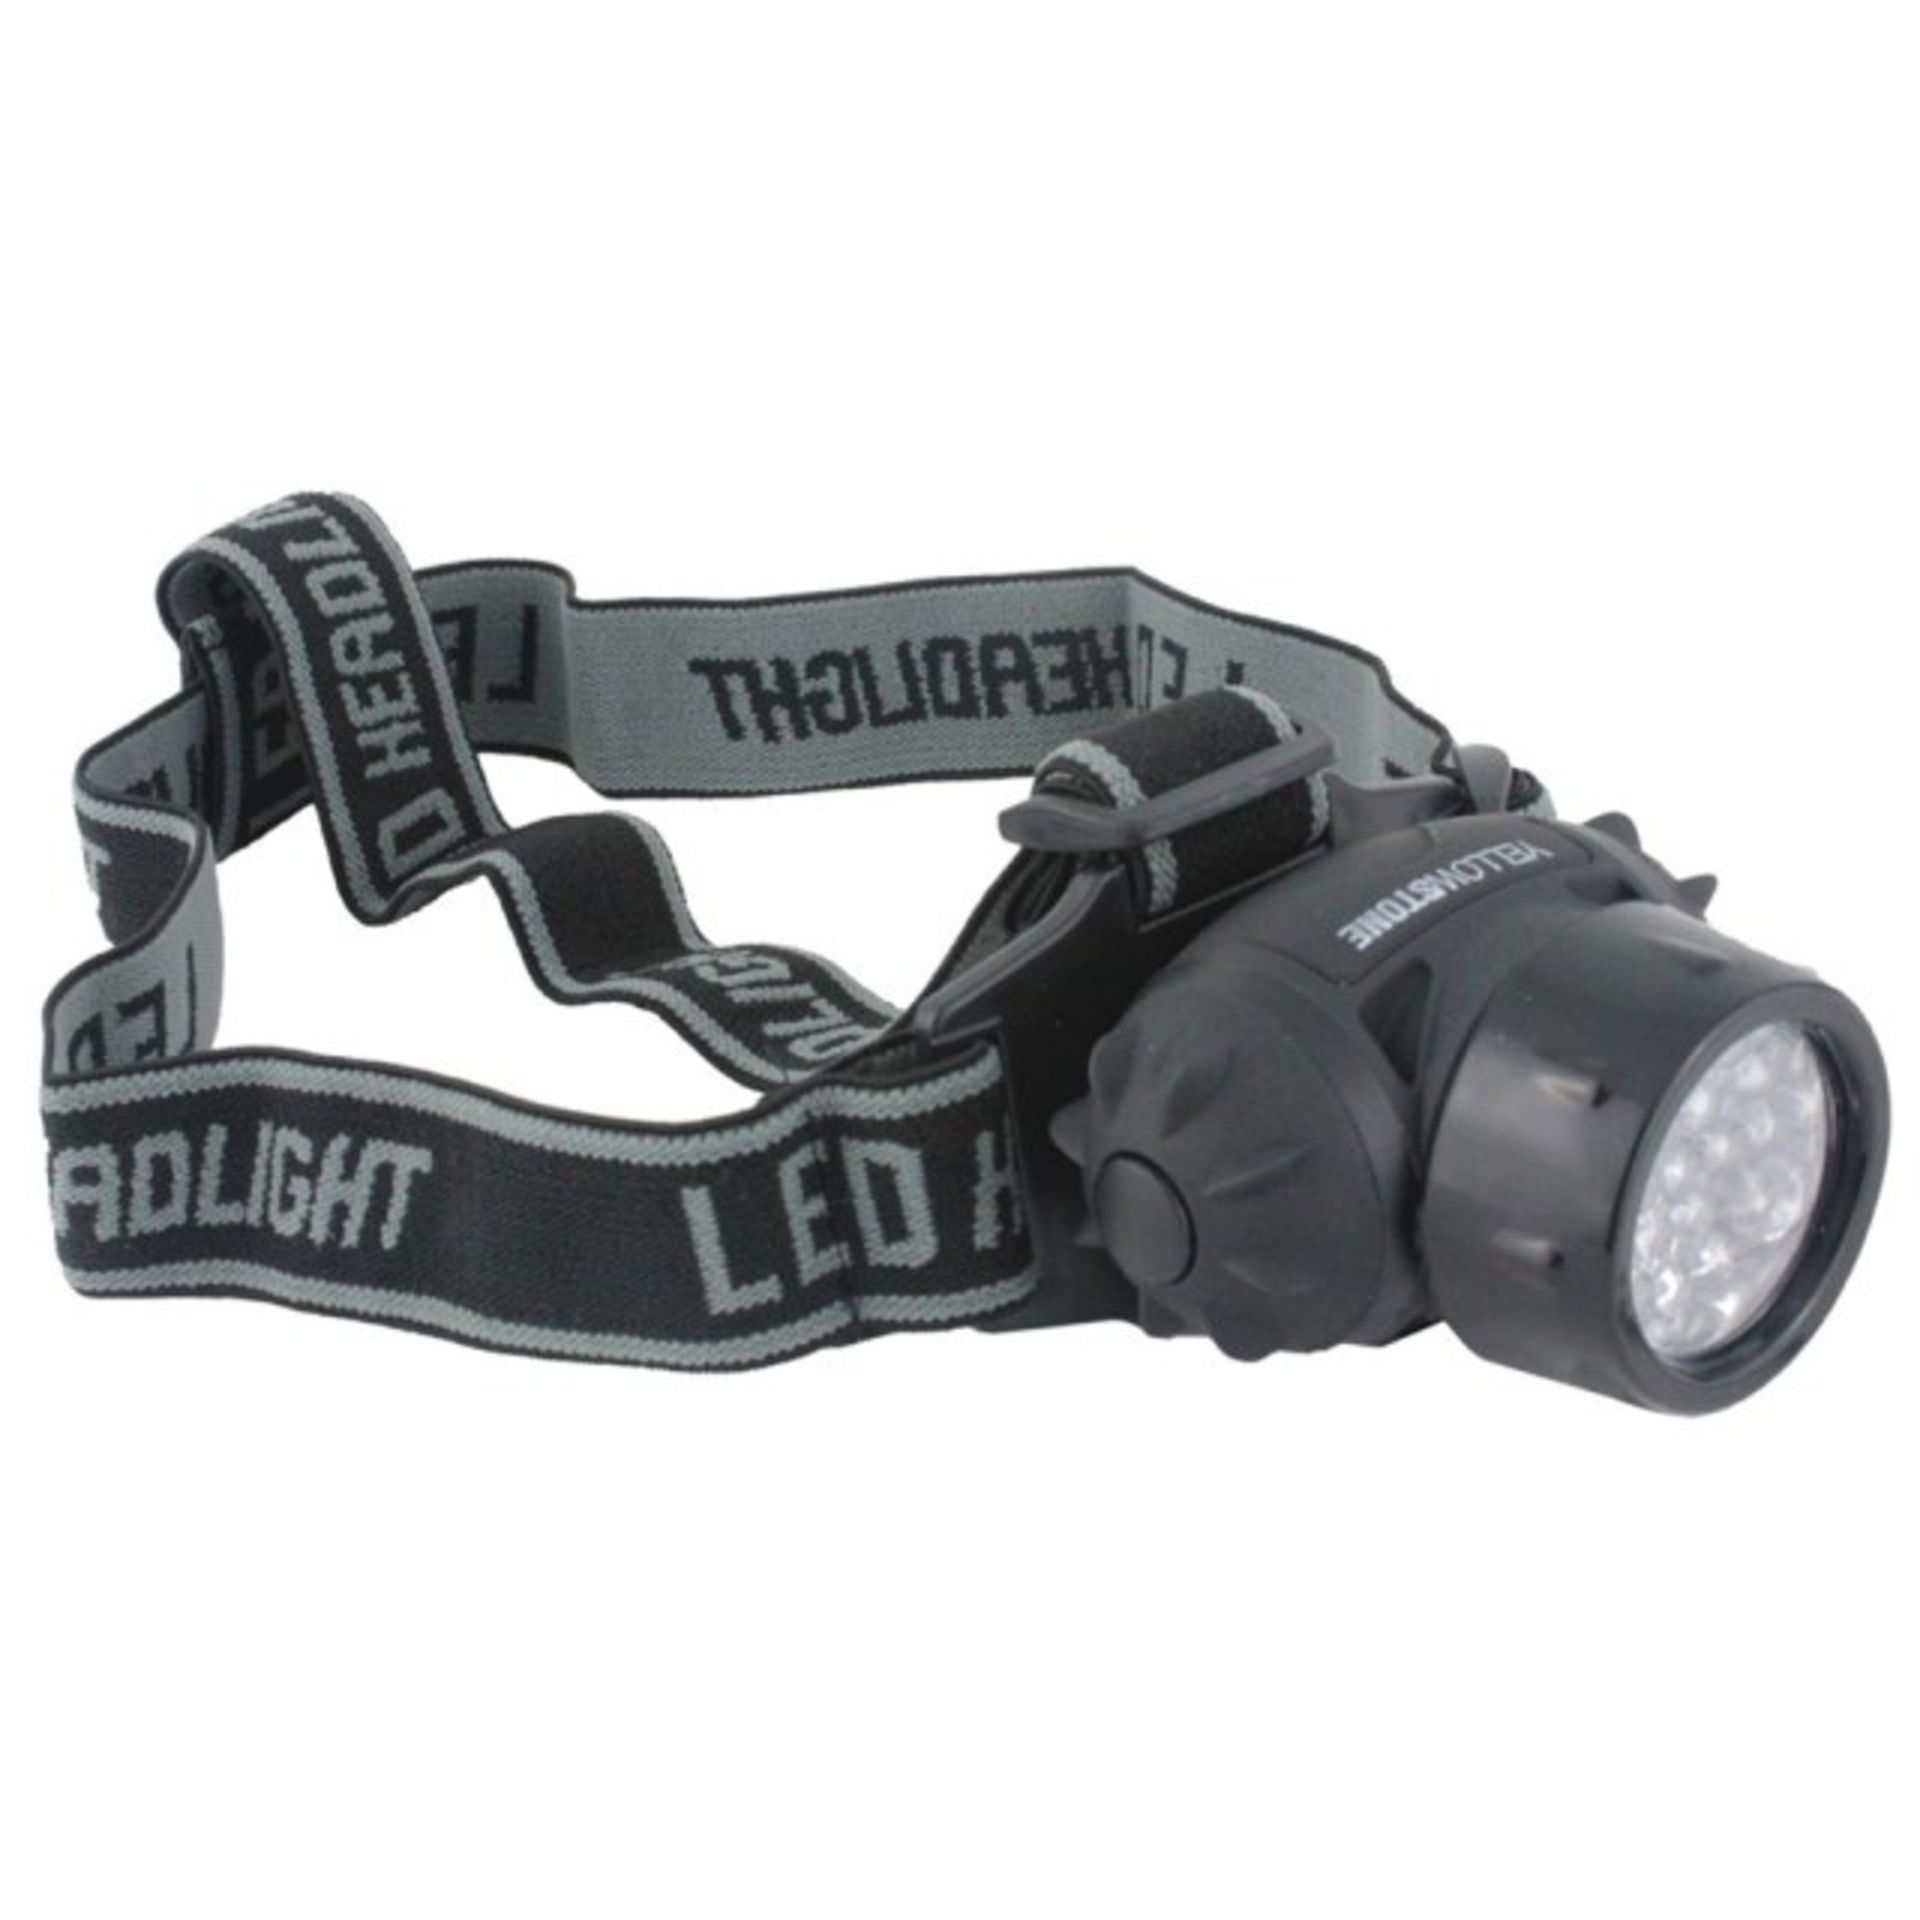 V *TRADE QTY* Brand New 19 LED Headtorch - Adjustable Head Strap - 4 Functions - 1 White LED/7 White